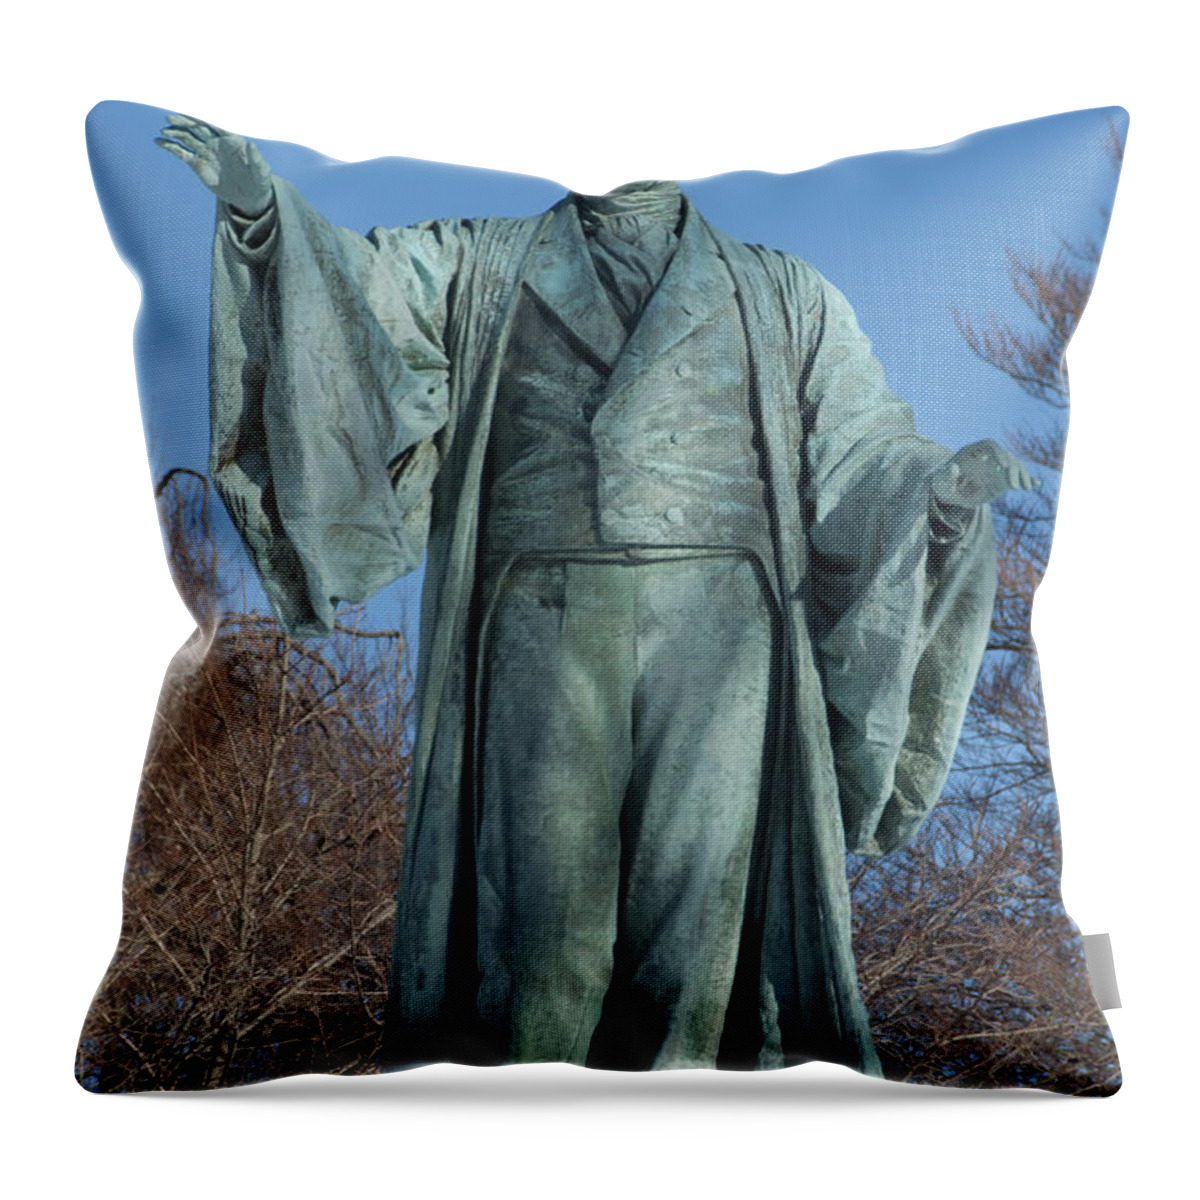 william Ellery Channing Throw Pillow featuring the photograph William Ellery Channing by Steven Natanson